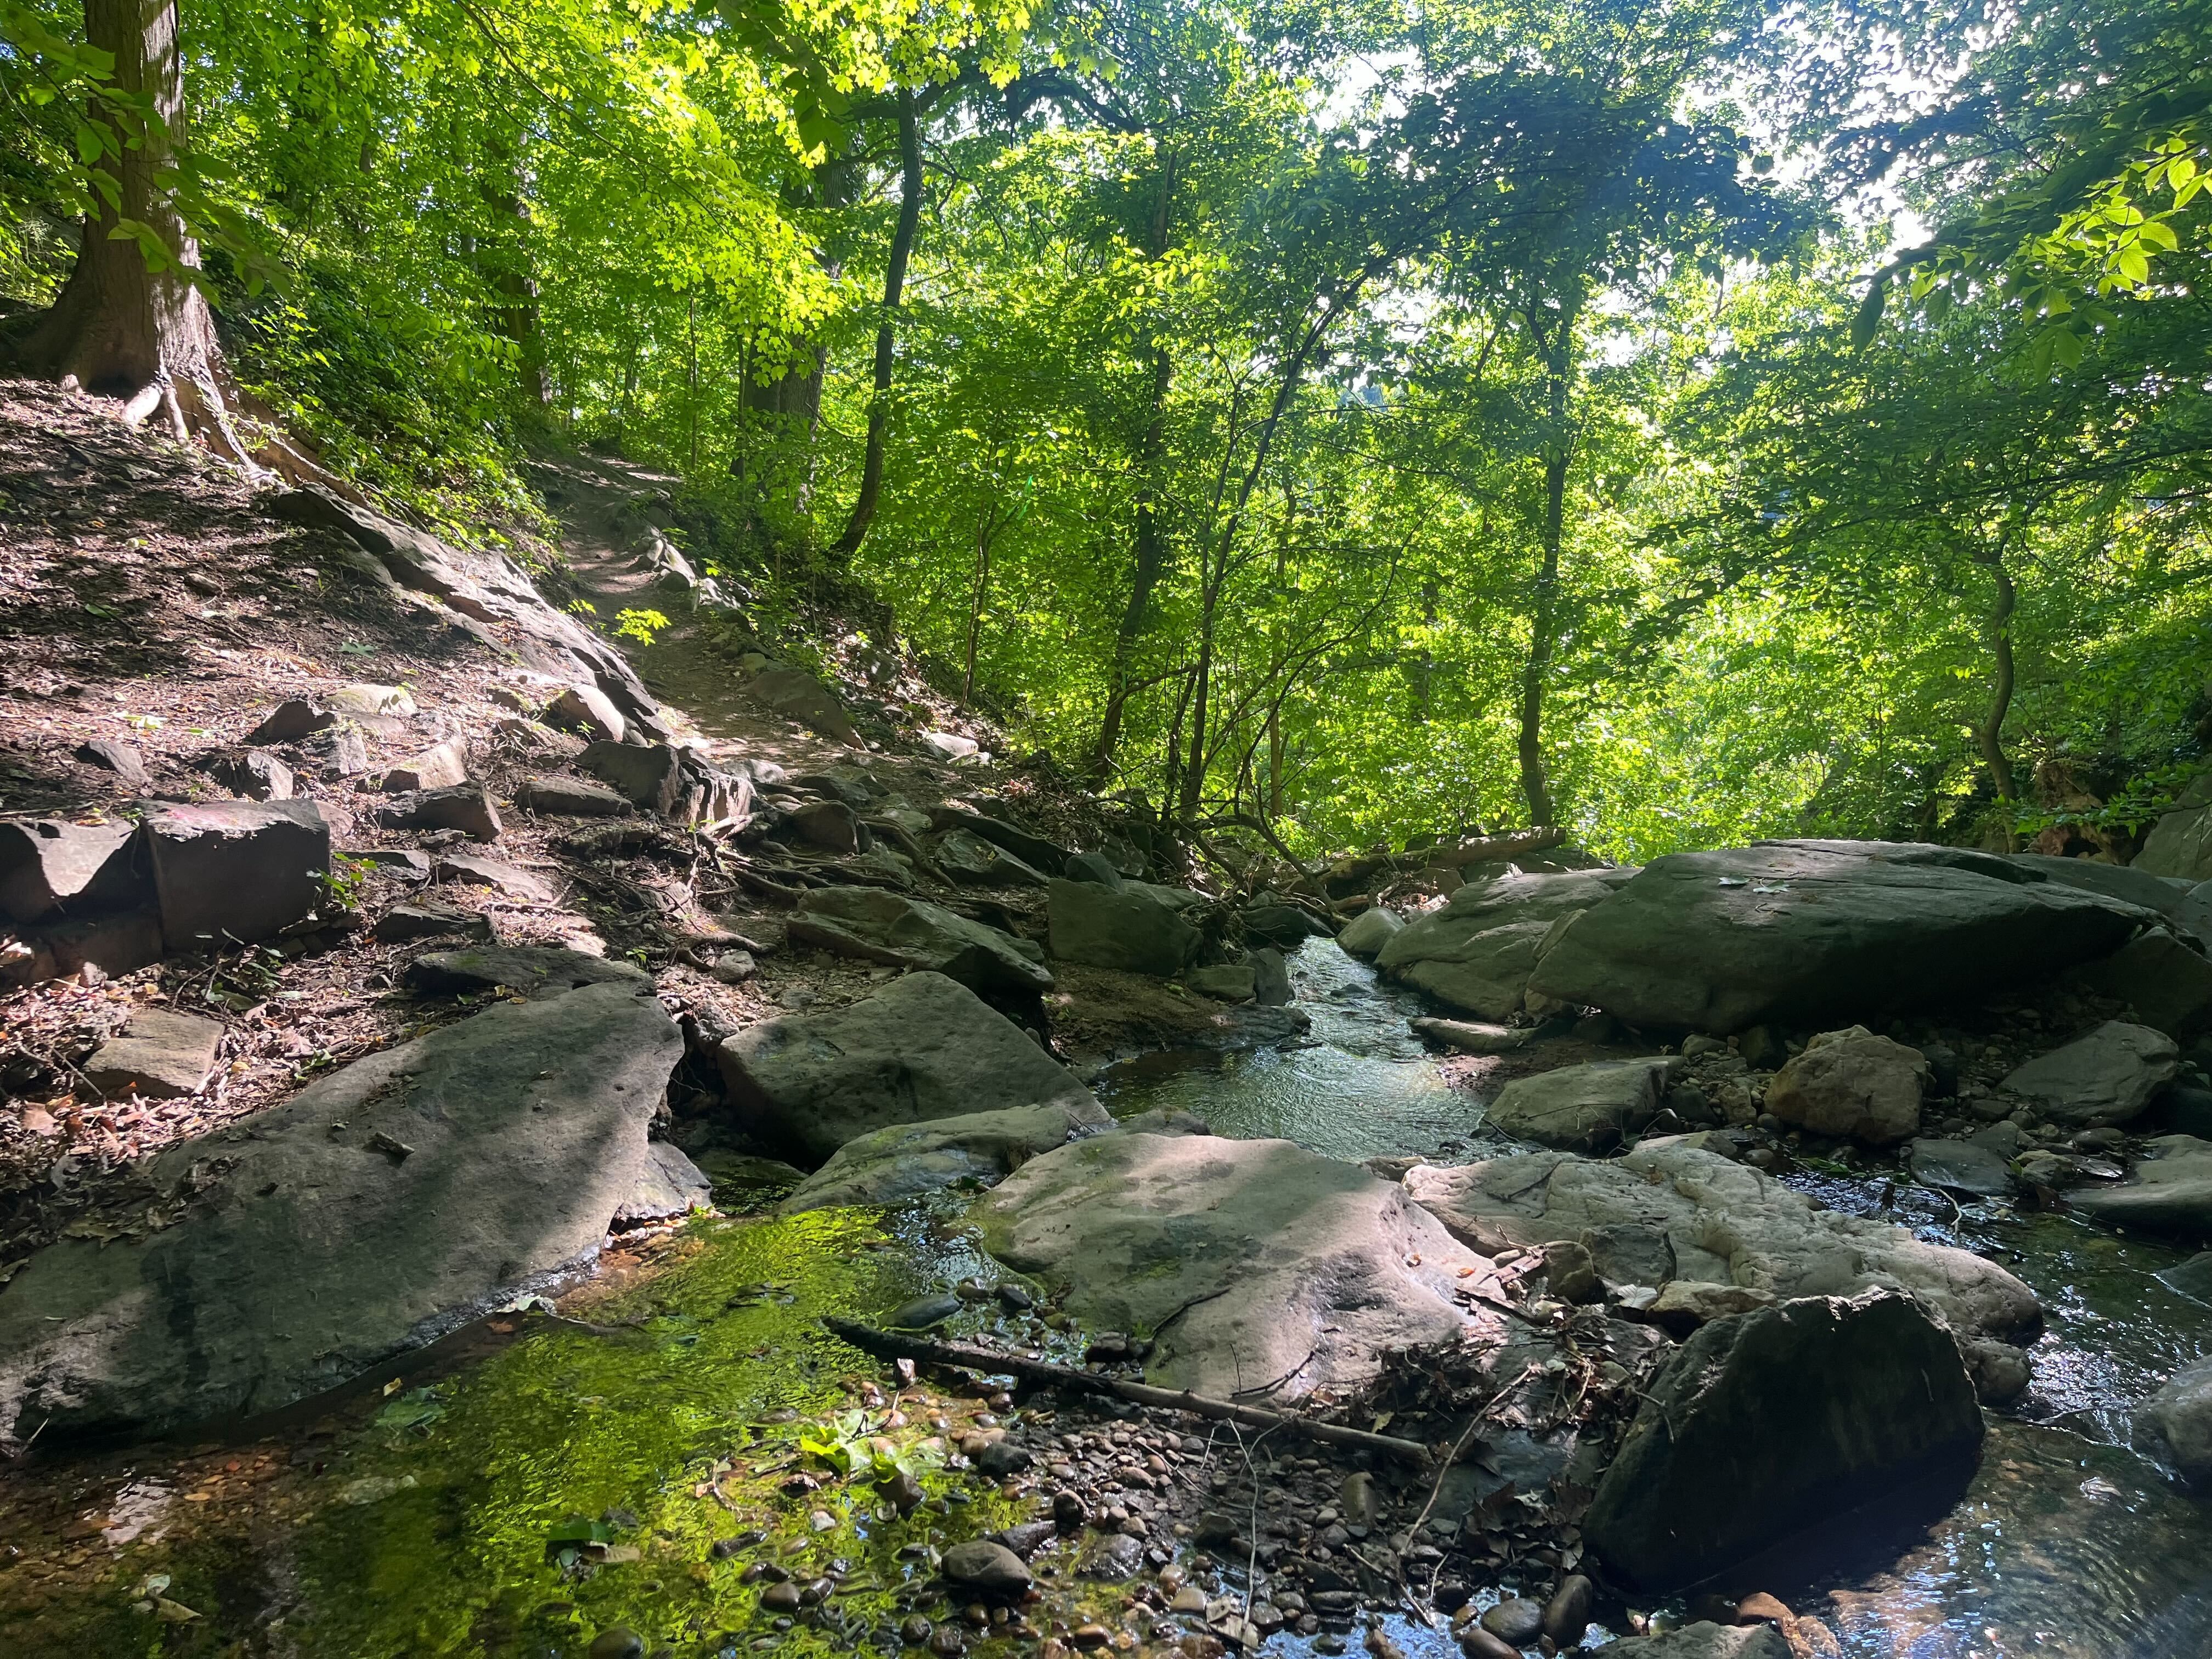 A creek's water running over rocks with trees in the background